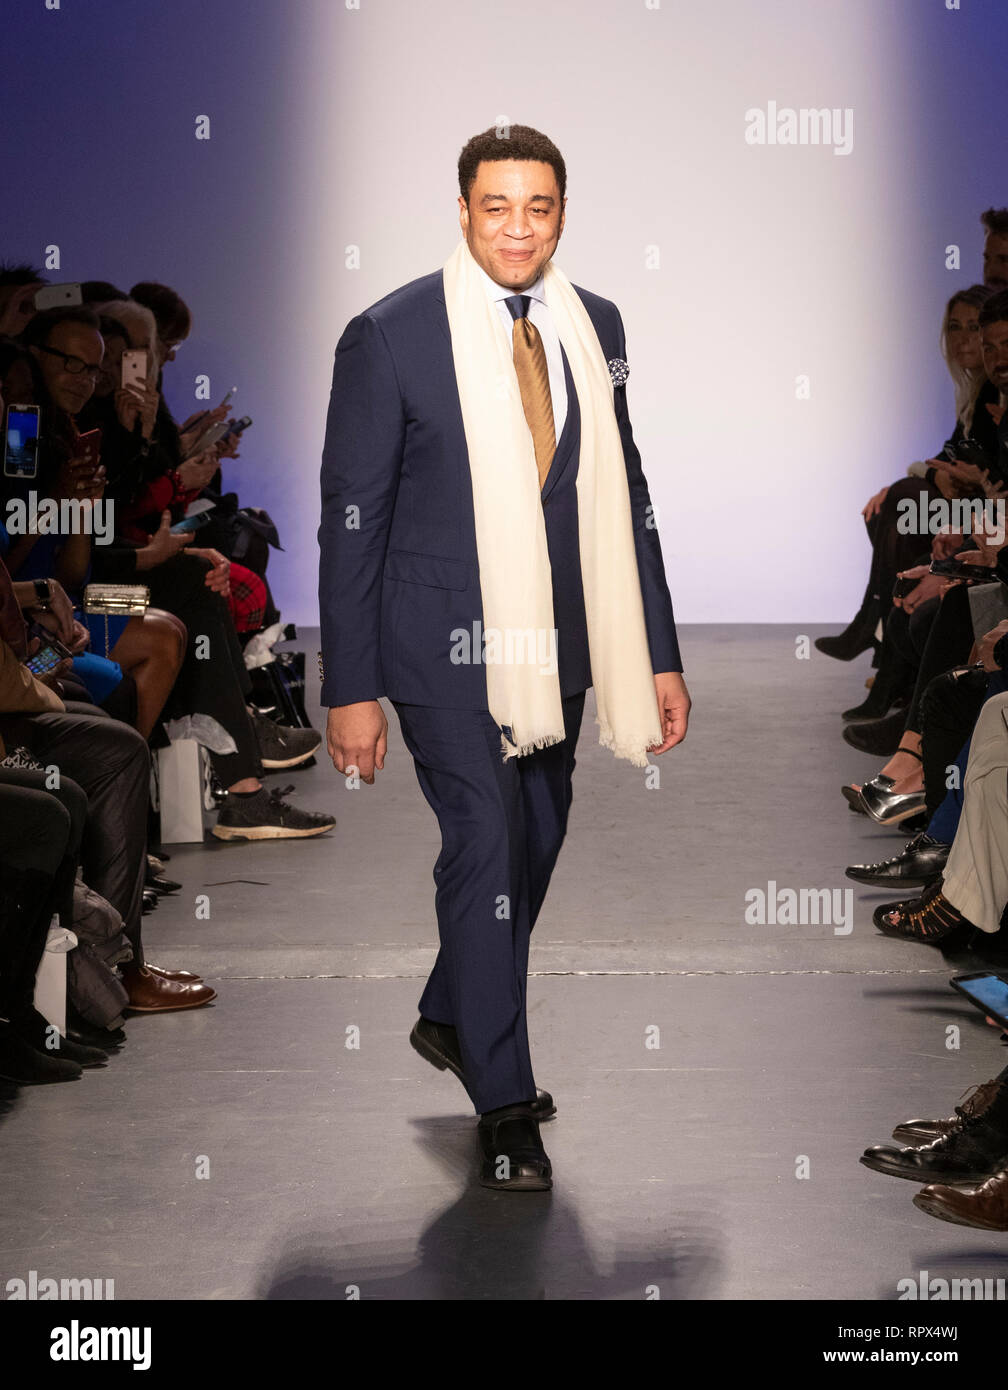 New York, NY - February 7, 2019: Harry Lennix walks runway during 3rd Annual Blue Jacket Fashion Show Benefitting The Prostate Cancer Foundation at Pier 59 Stock Photo